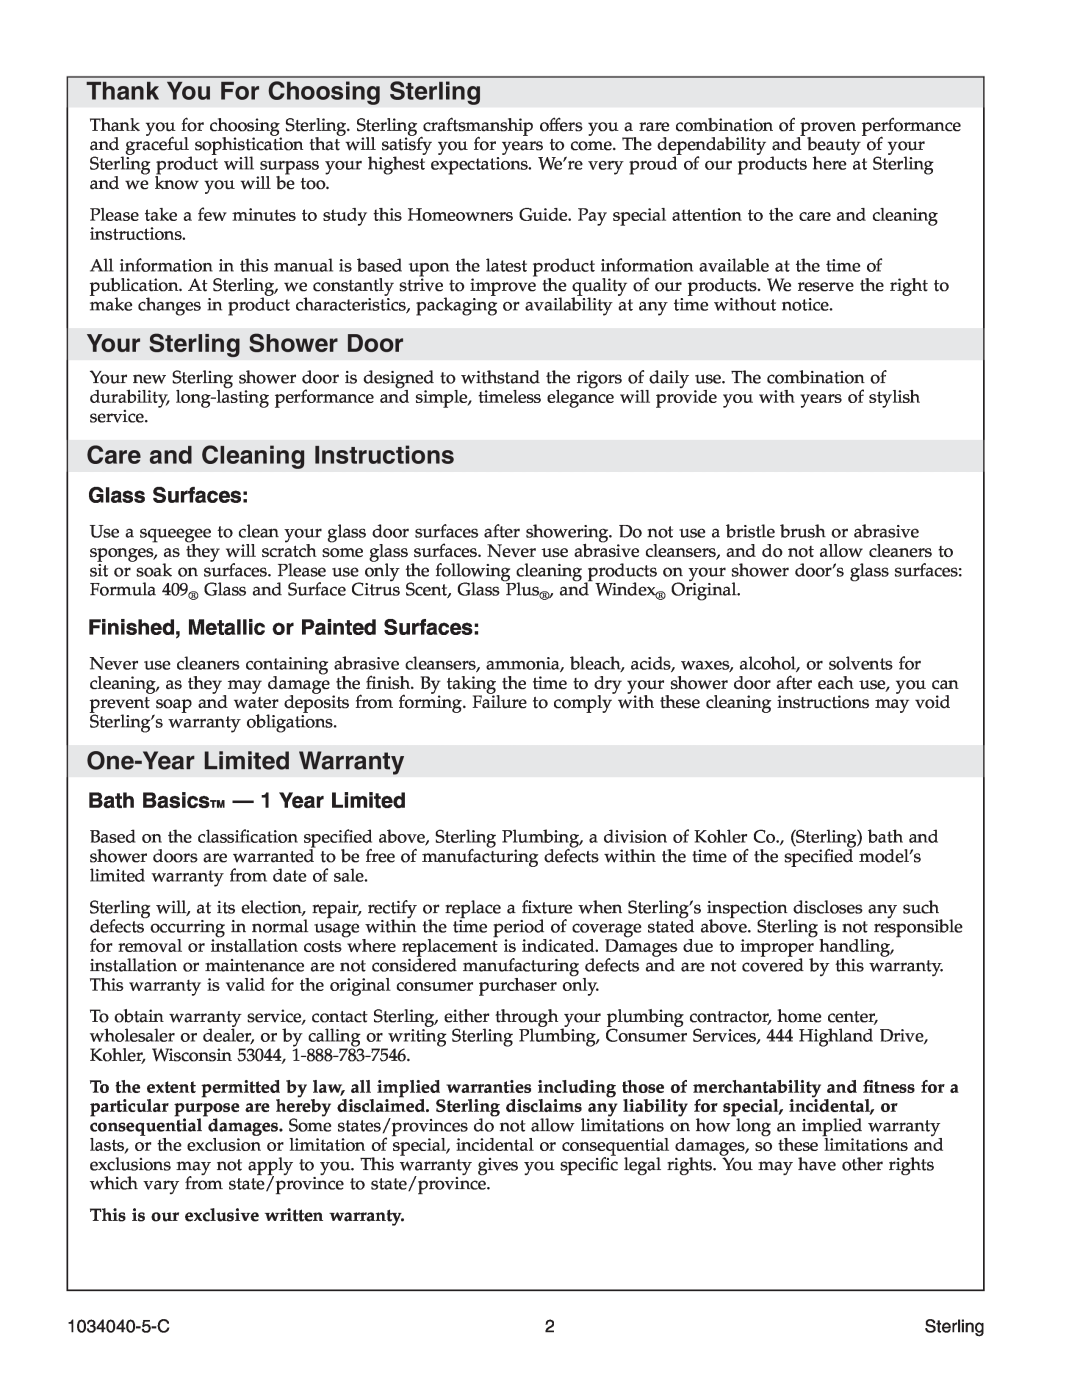 Sterling Plumbing 600C Series Thank You For Choosing Sterling, Your Sterling Shower Door, Care and Cleaning Instructions 